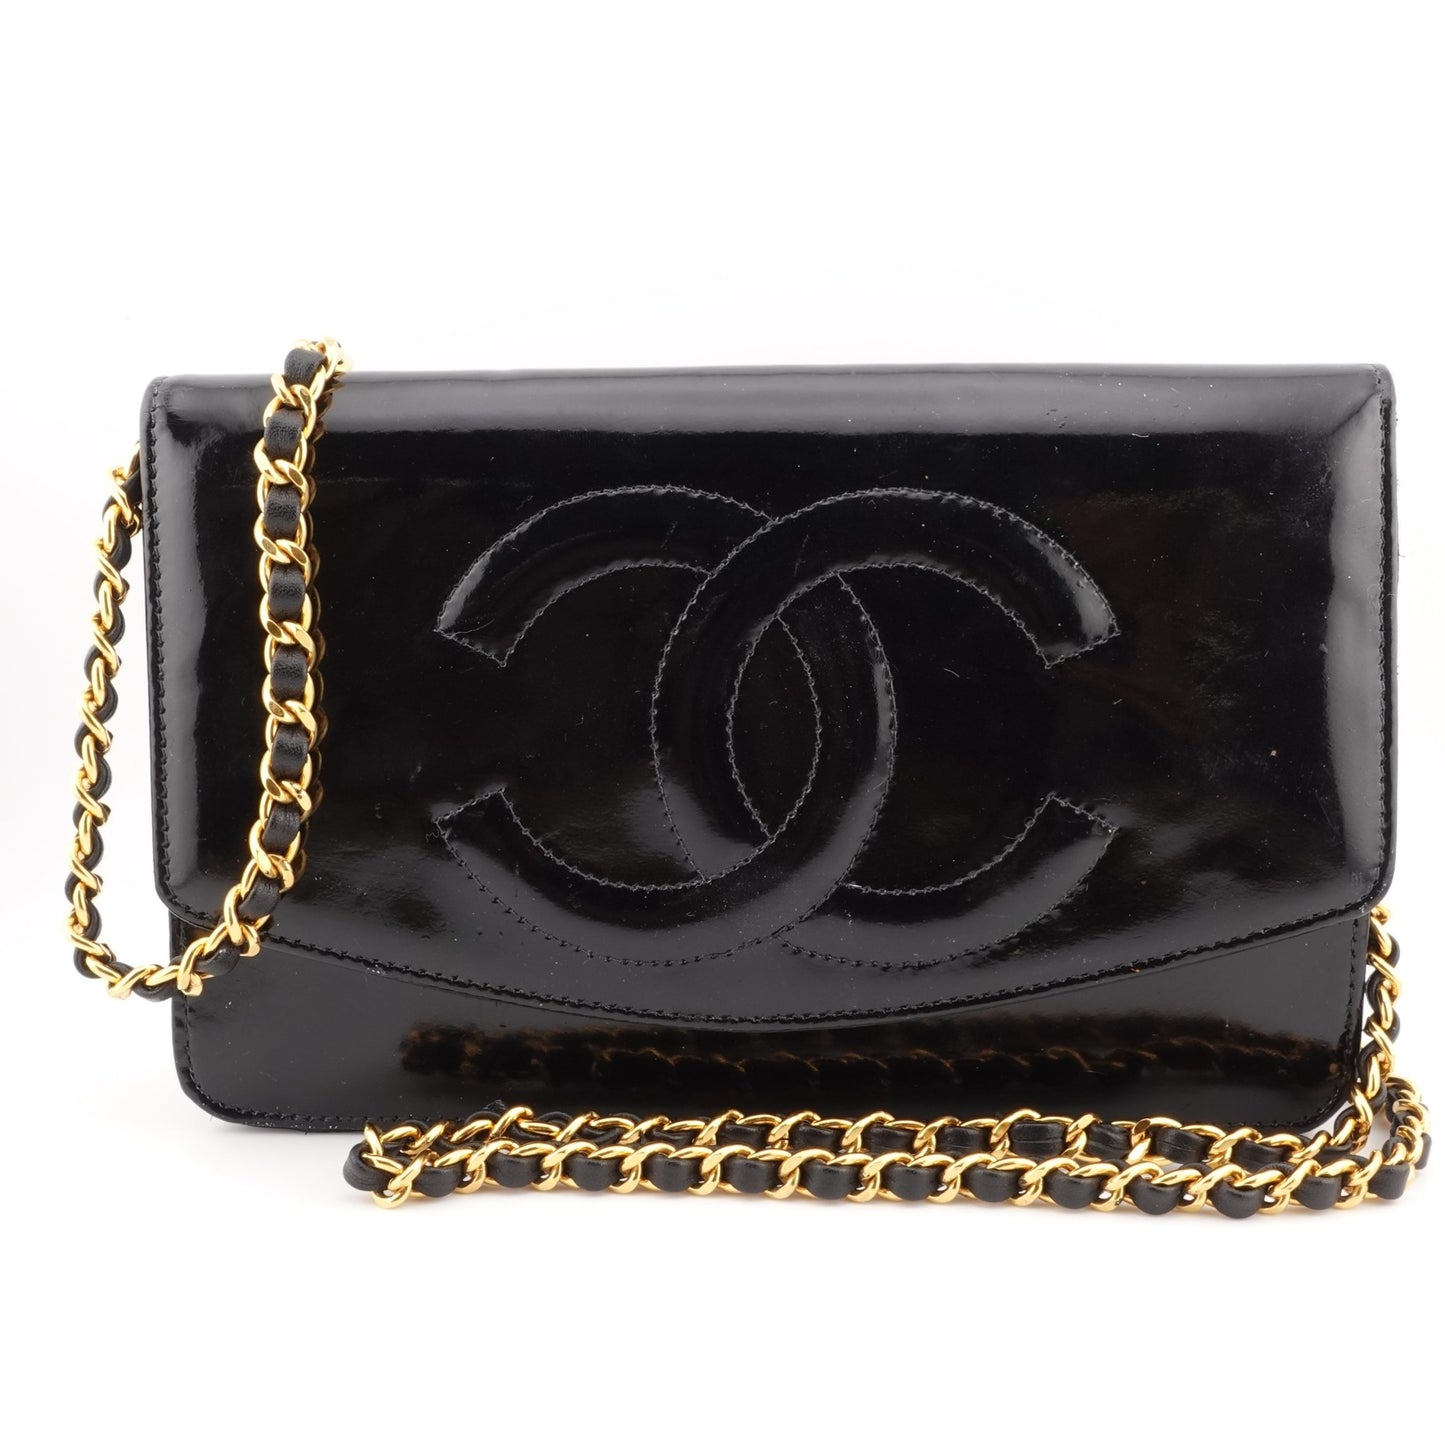 CHANEL Patent Leather Timeless Original Wallet on Chain - Bag Envy